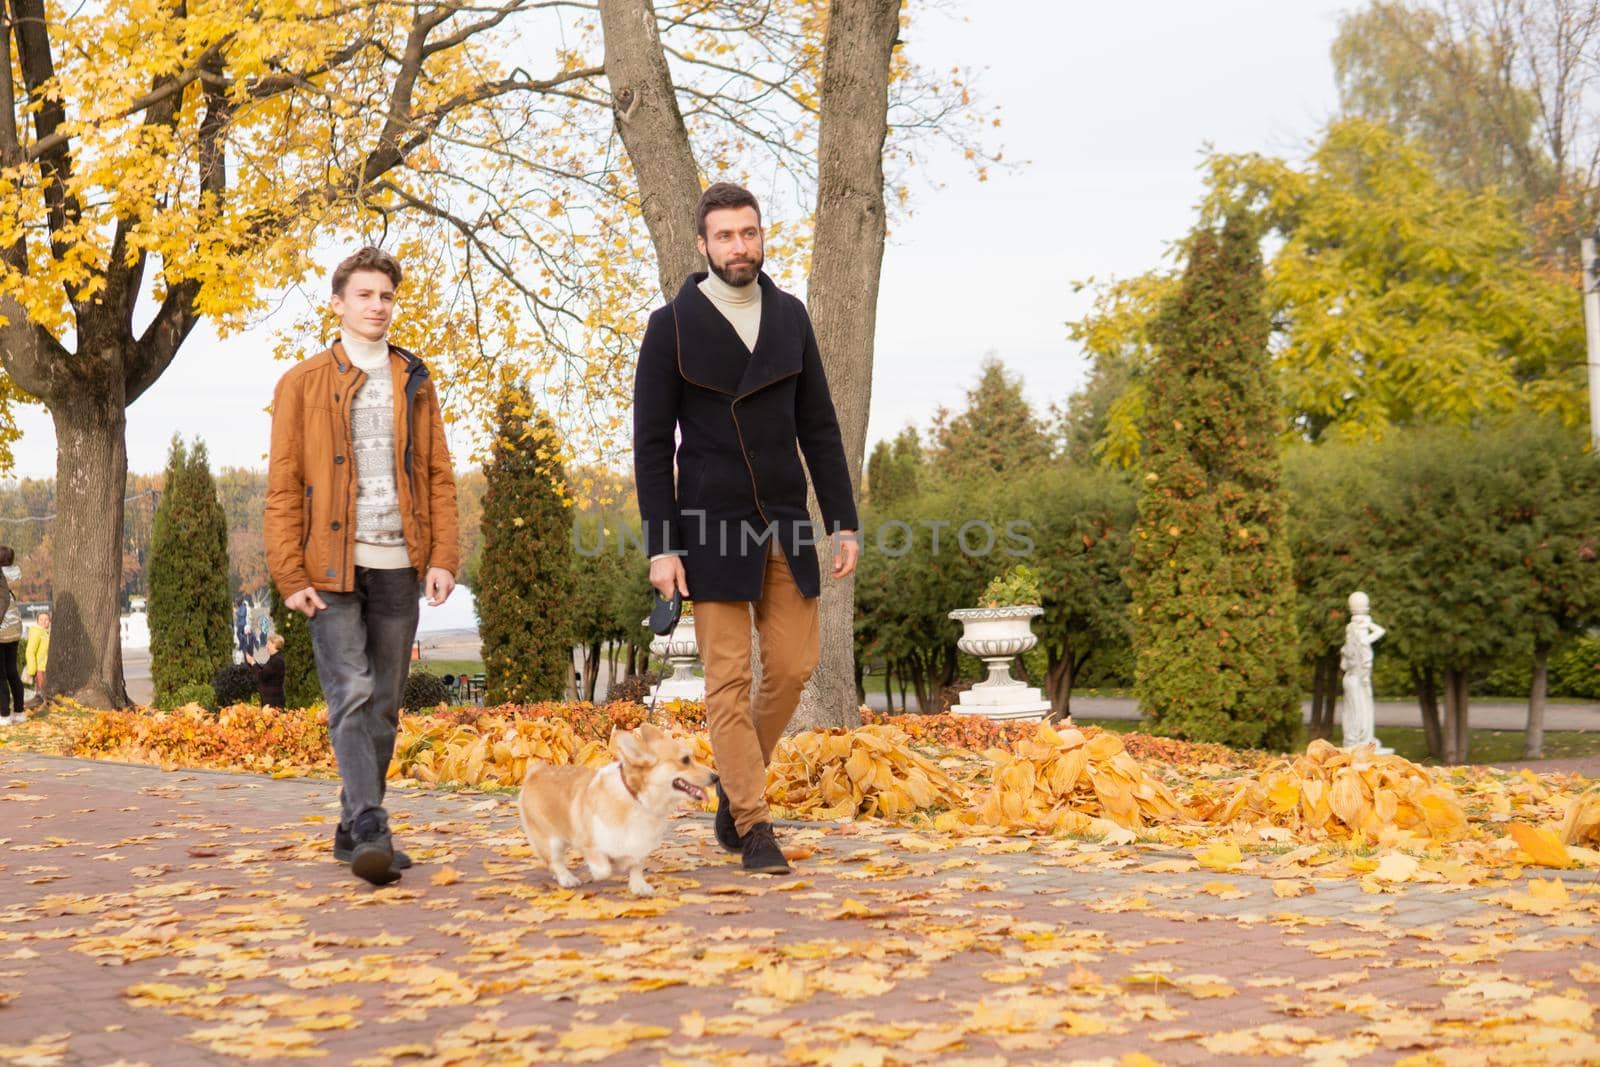 Father and son with a pet on a walk in the autumn park by Annu1tochka